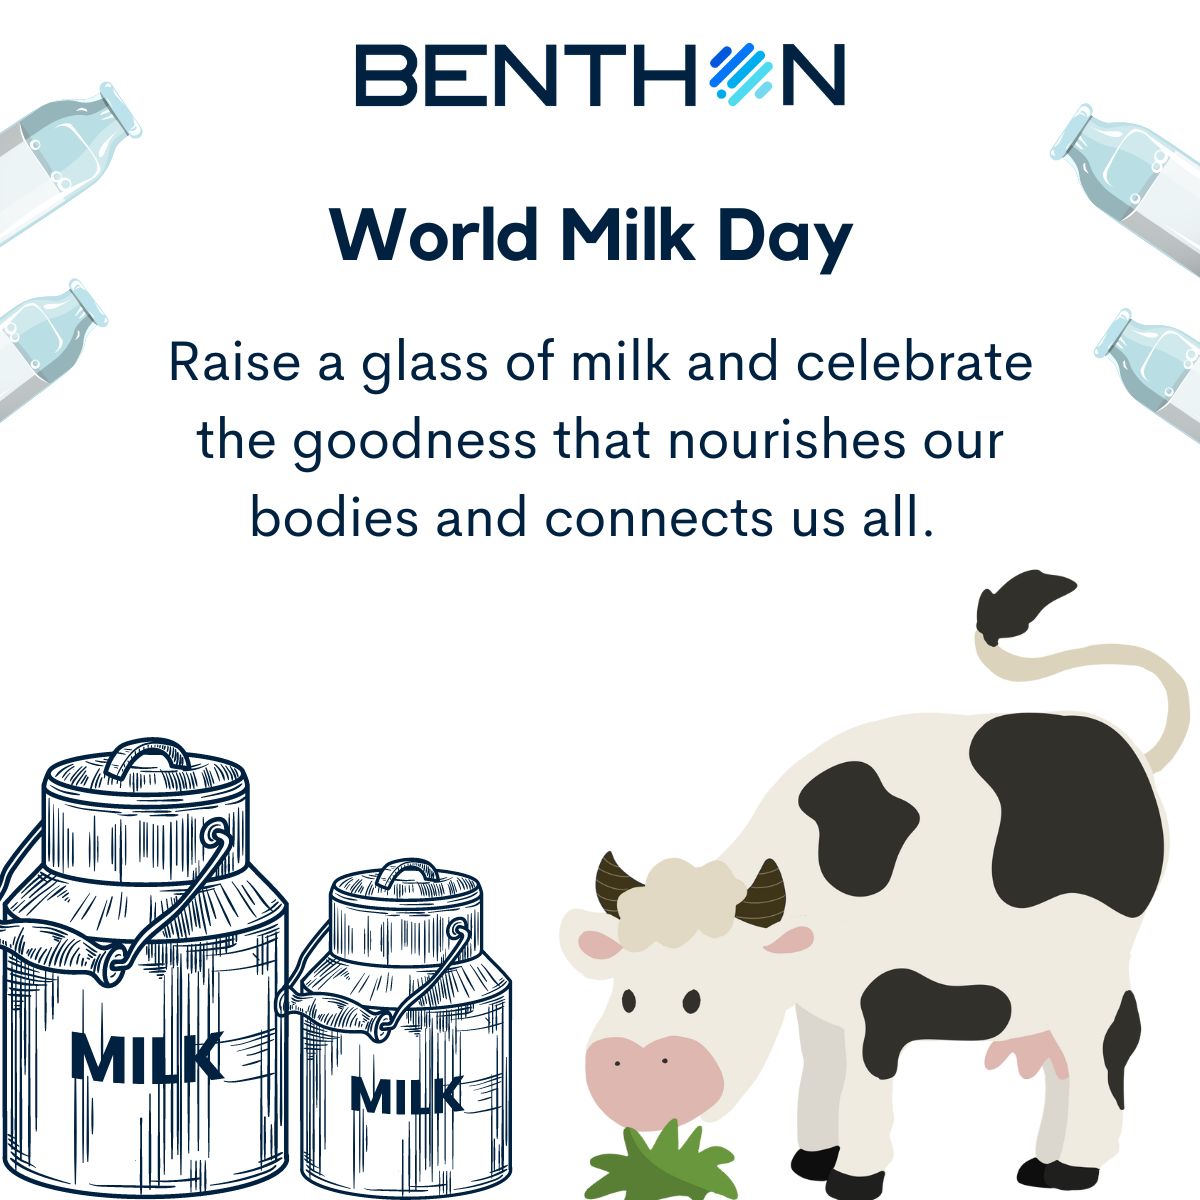 Happy World Milk Day! Today, we celebrate the essential part that milk plays in our diets.

#milkLove #drinkmilk #healthynutrition #worldmilkday2020 #worldmilkday #celebratedairy #milkproud #milklife